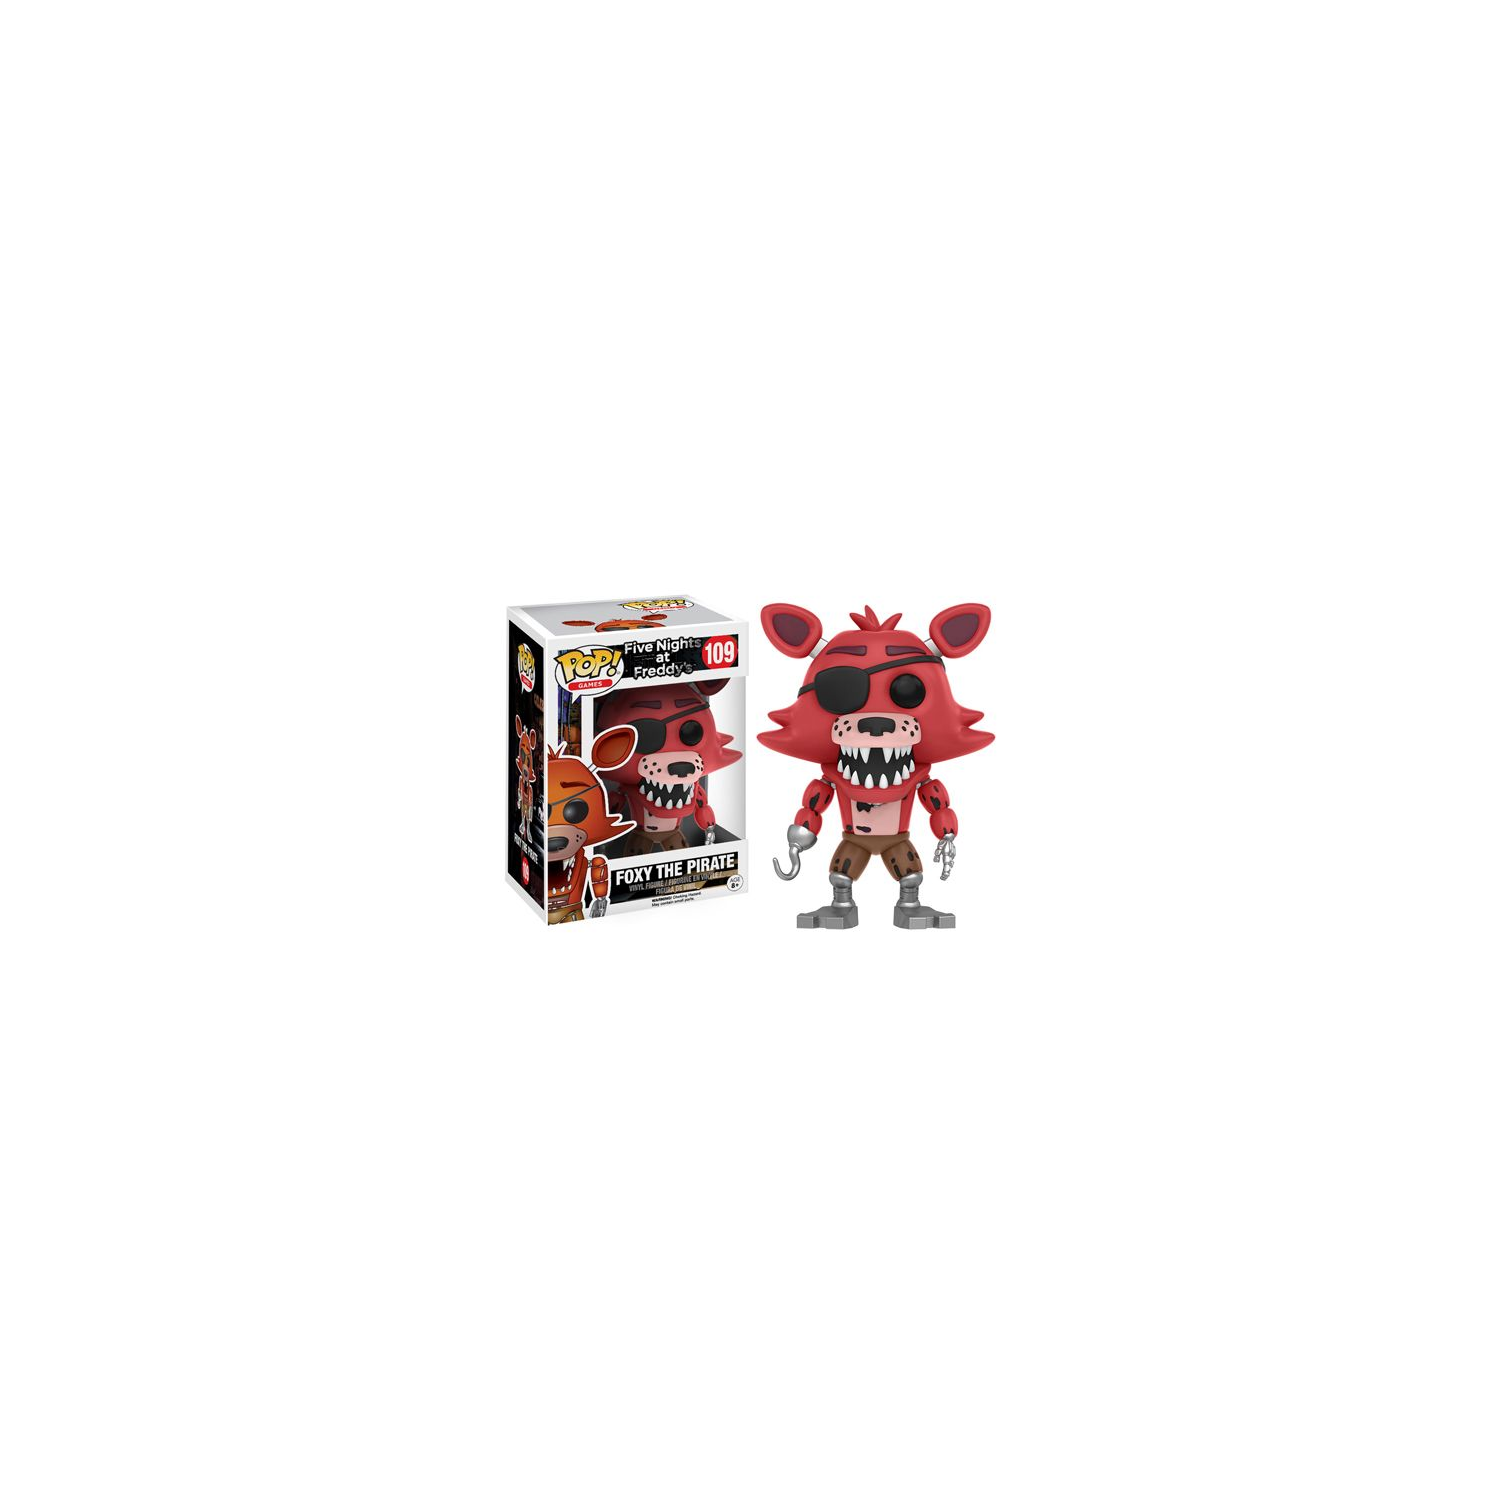 Five Nights at Freddy's Pop! Foxy the Pirate Figure